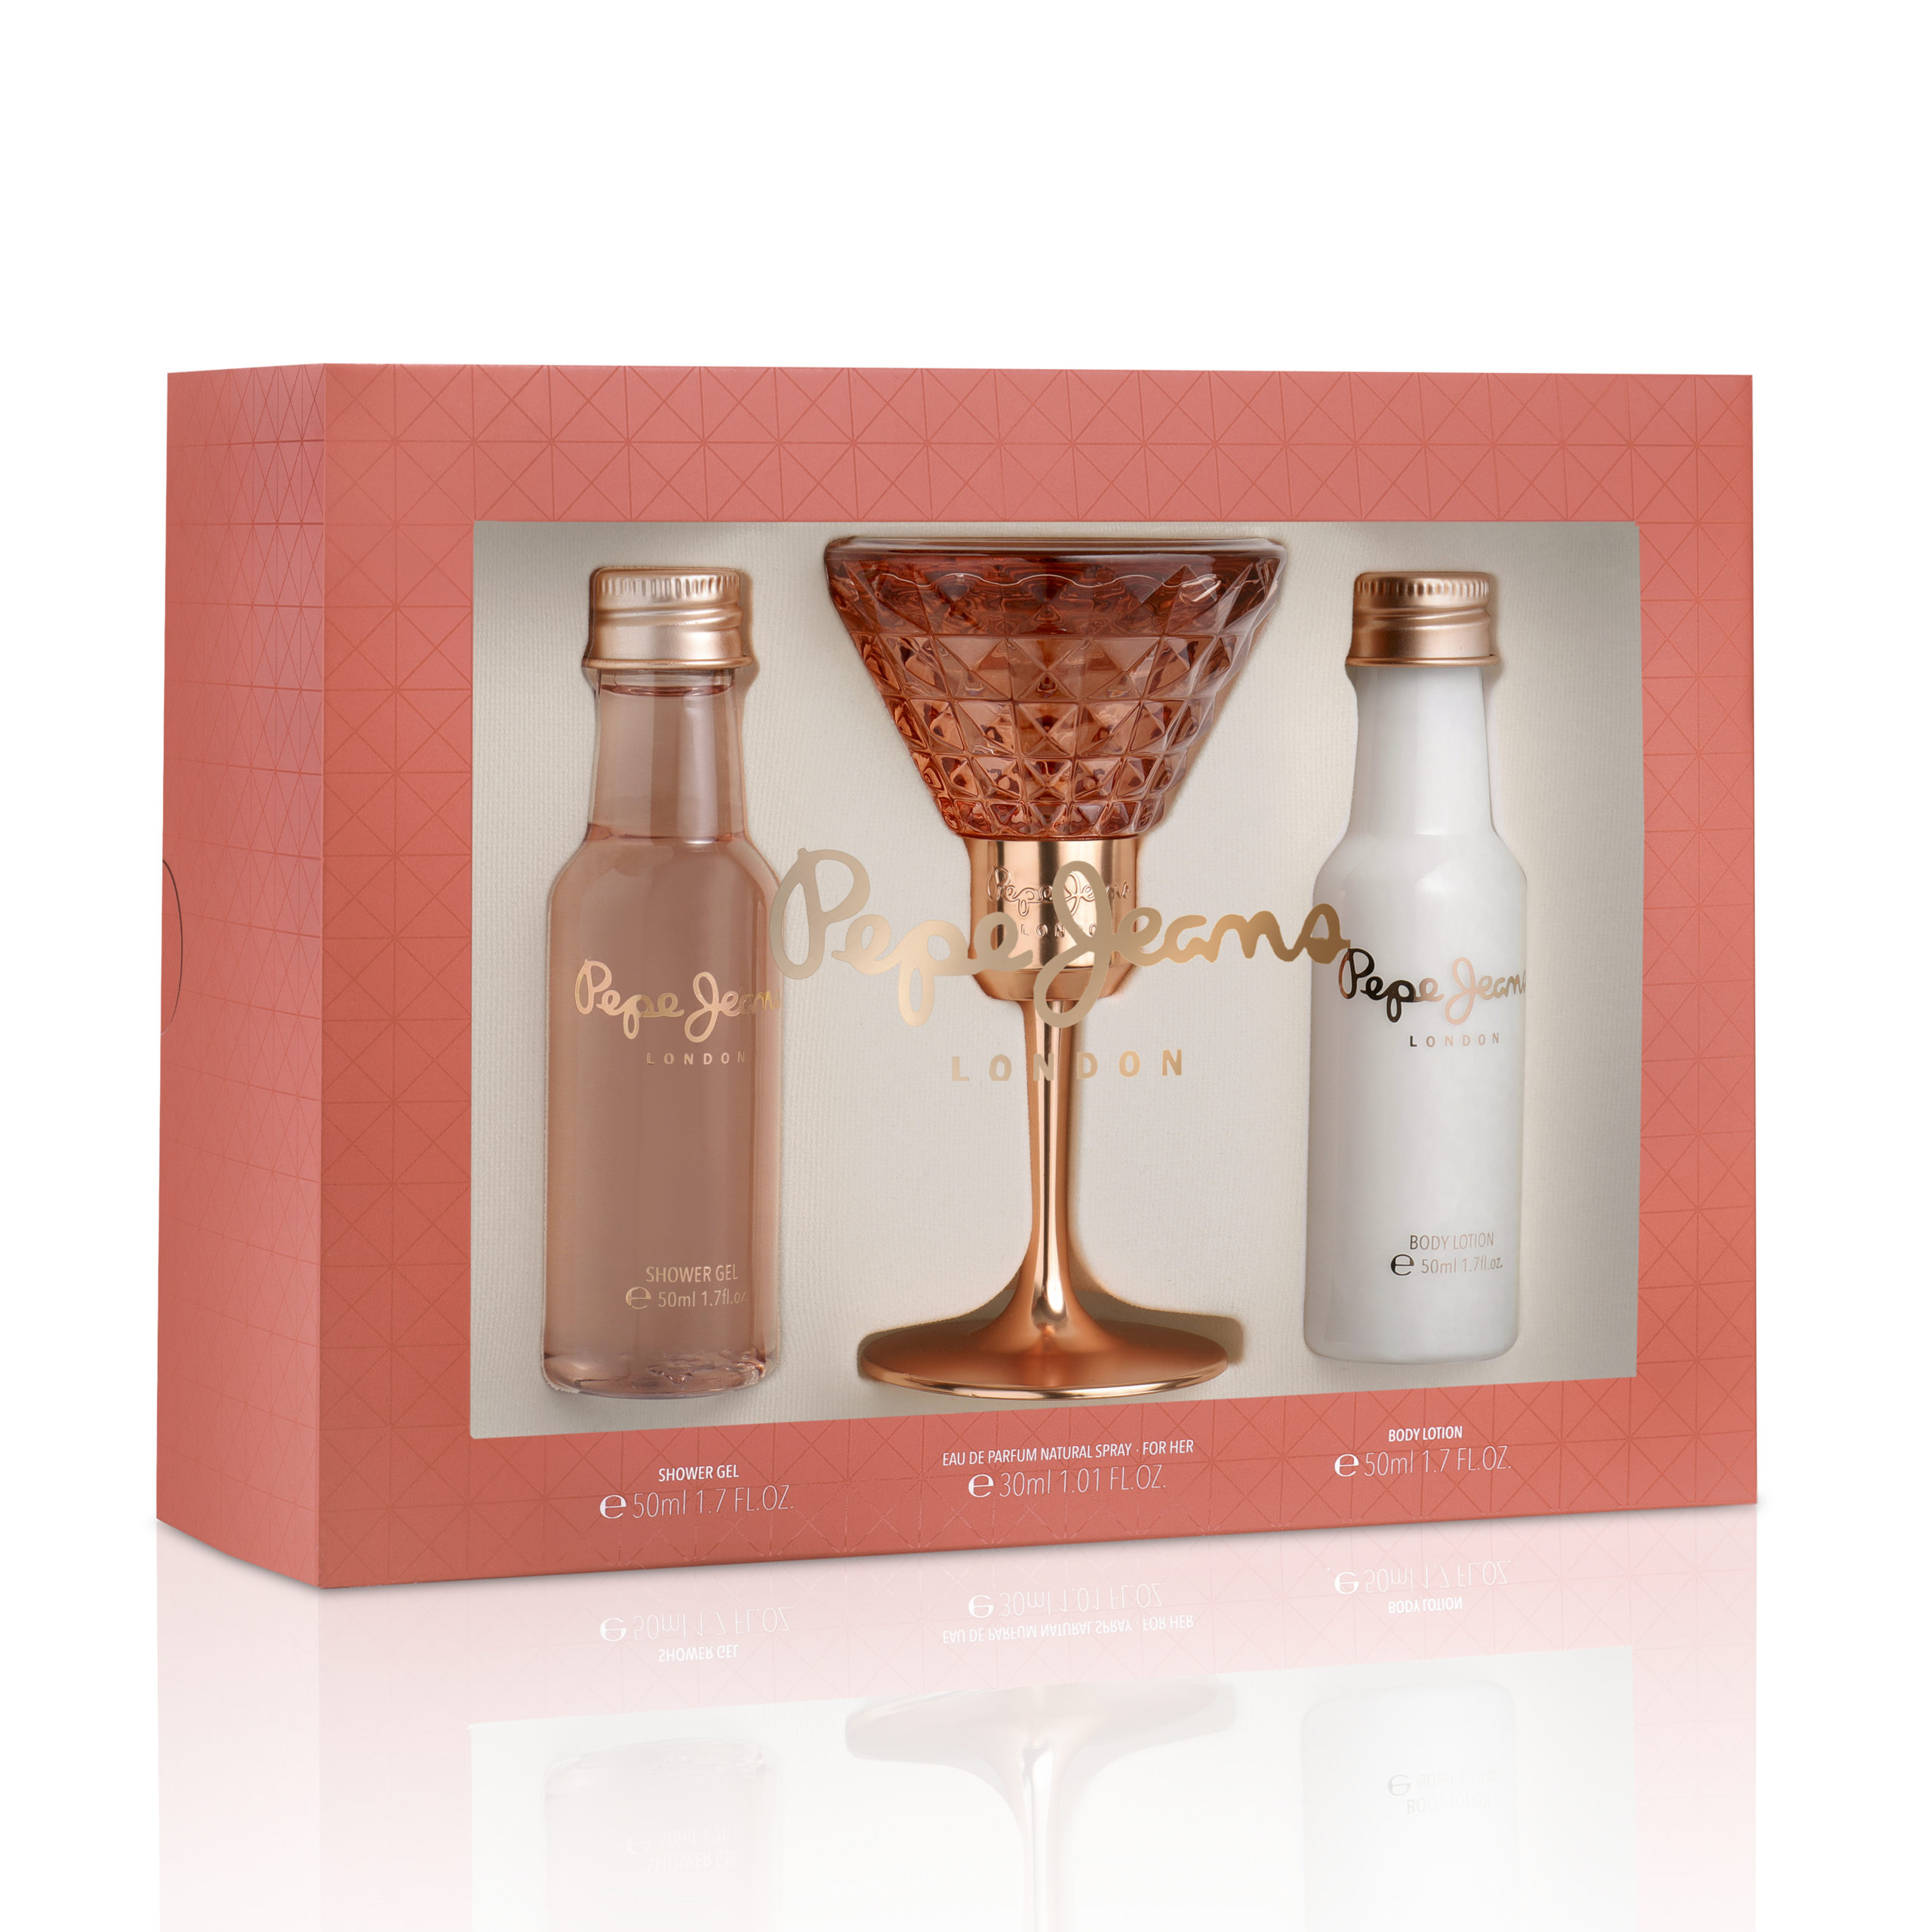  Pepe Jeans London Celebrate for Her 2pc Set - EDP 80ml + Body  Lotion 80ml : Beauty & Personal Care